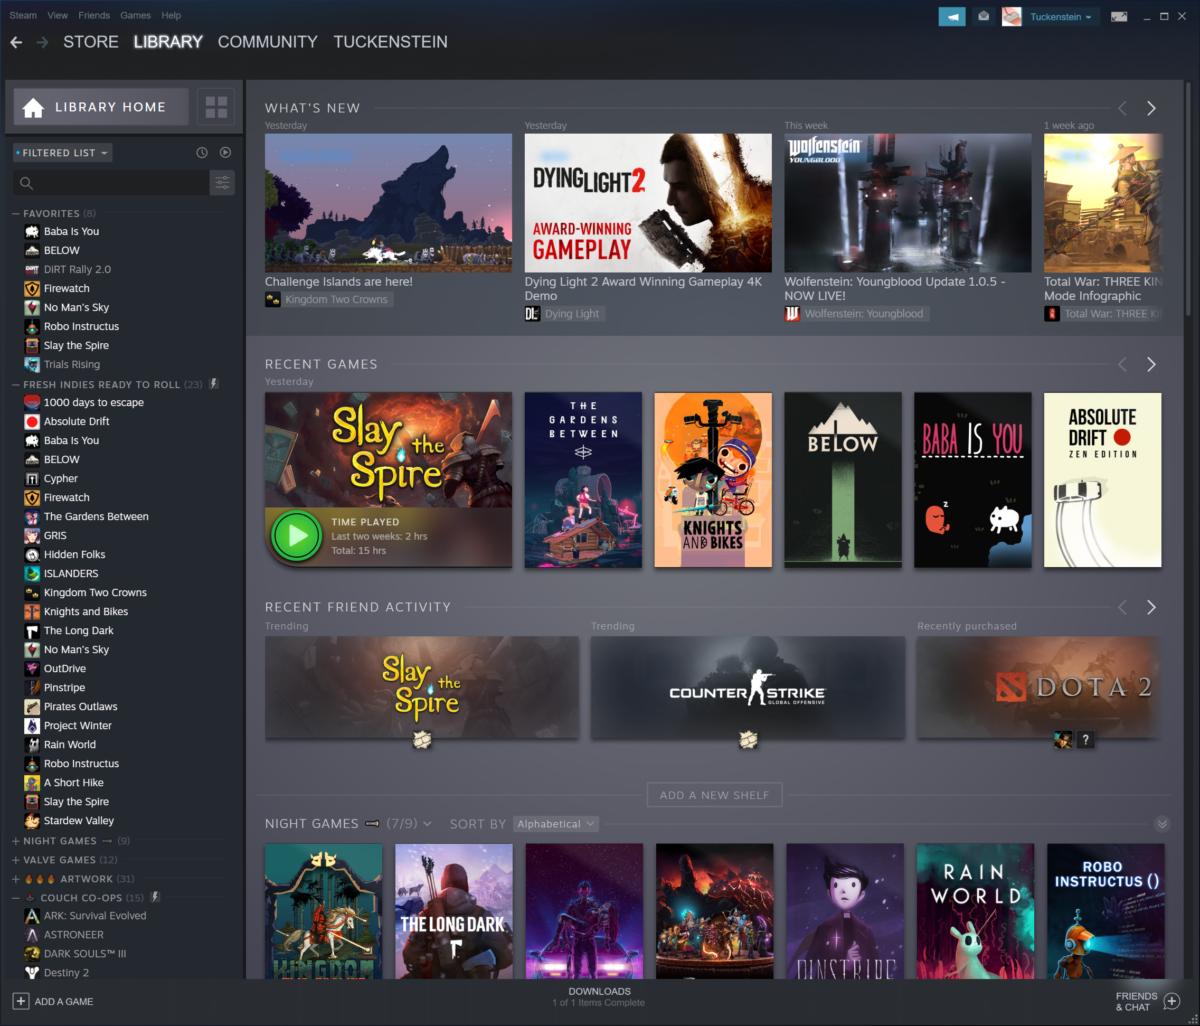 Steam Store Overhaul Reportedly Coming Soon With These Changes - GameSpot